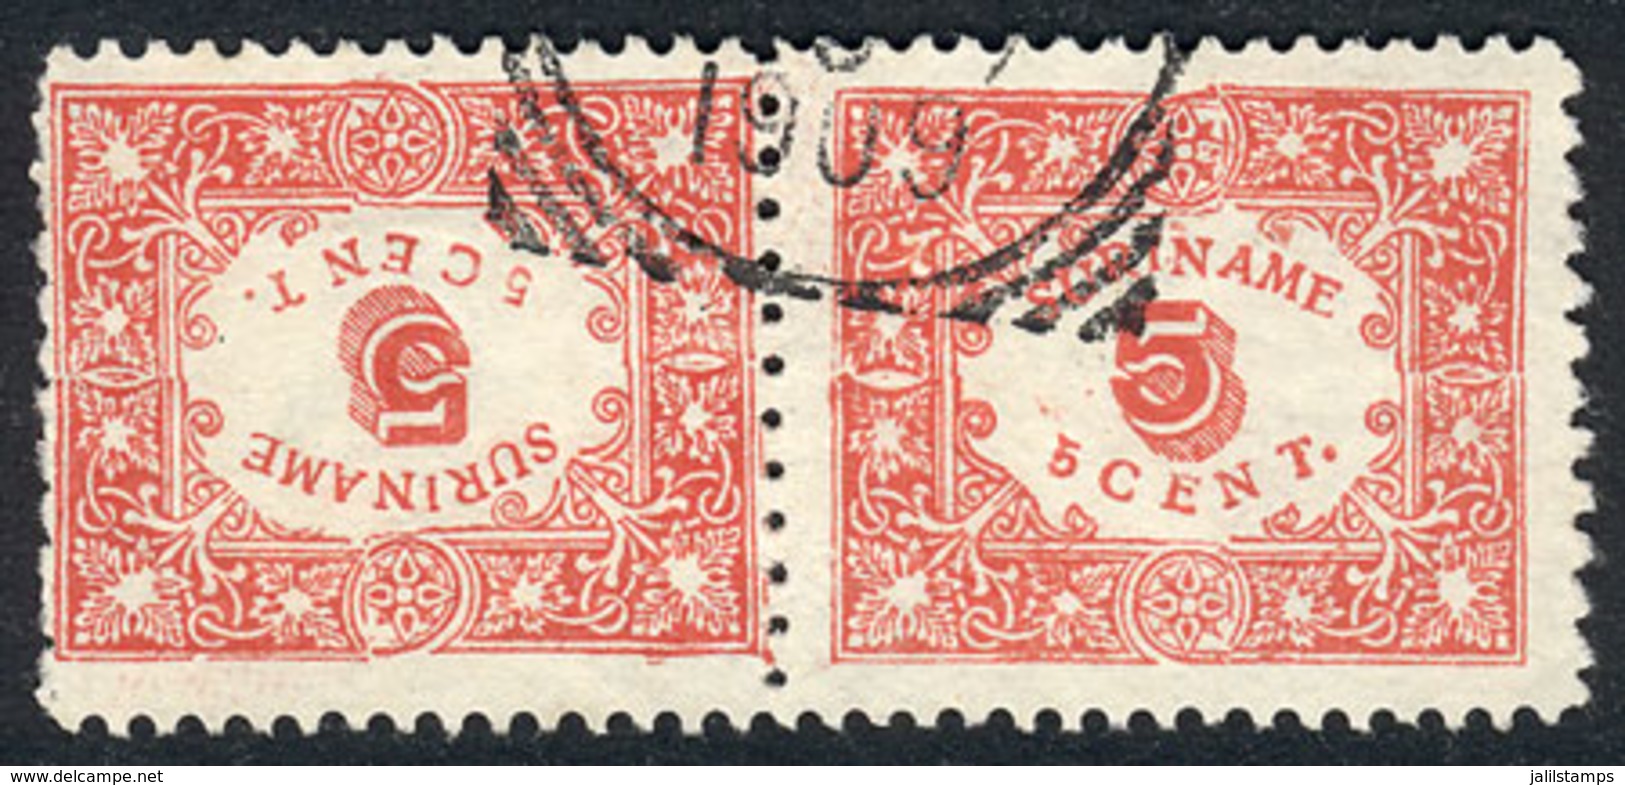 SURINAME: Yvert 58a, 1909 5c. Red Perforated, Pair Forming Tete-beche, Very Fine Quality, Rare, Catalog Value Euros 140. - Suriname